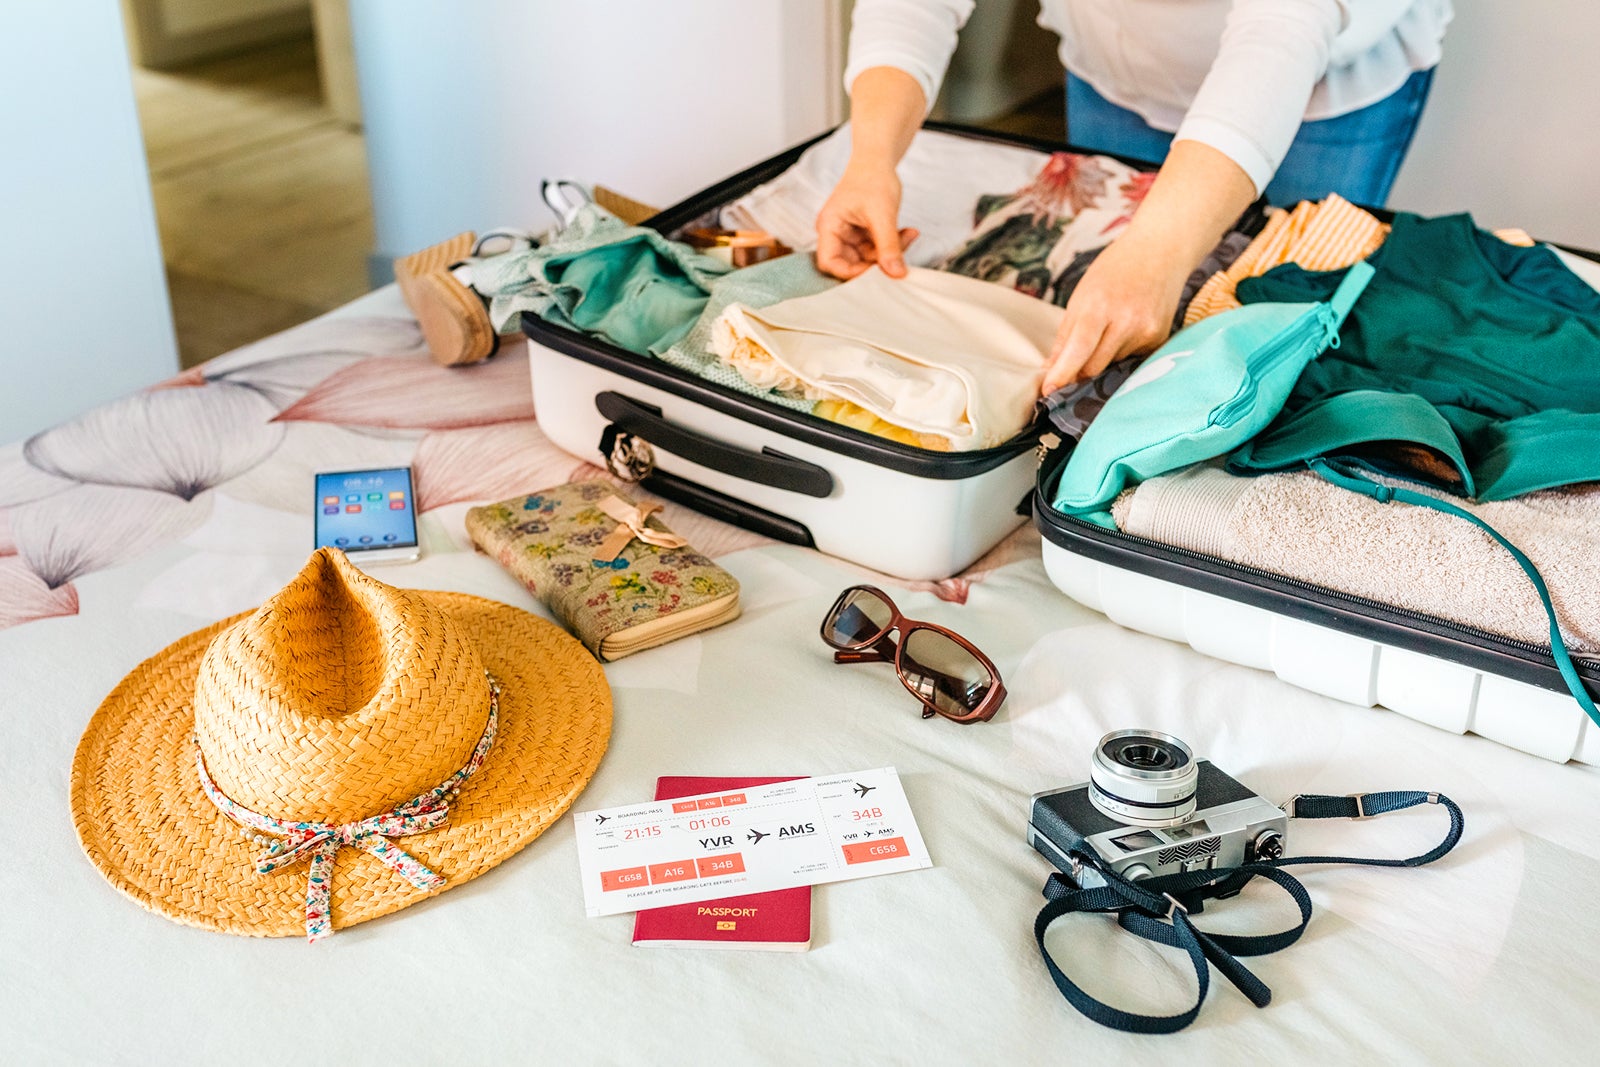 10 must-have travel accessories for less than $15